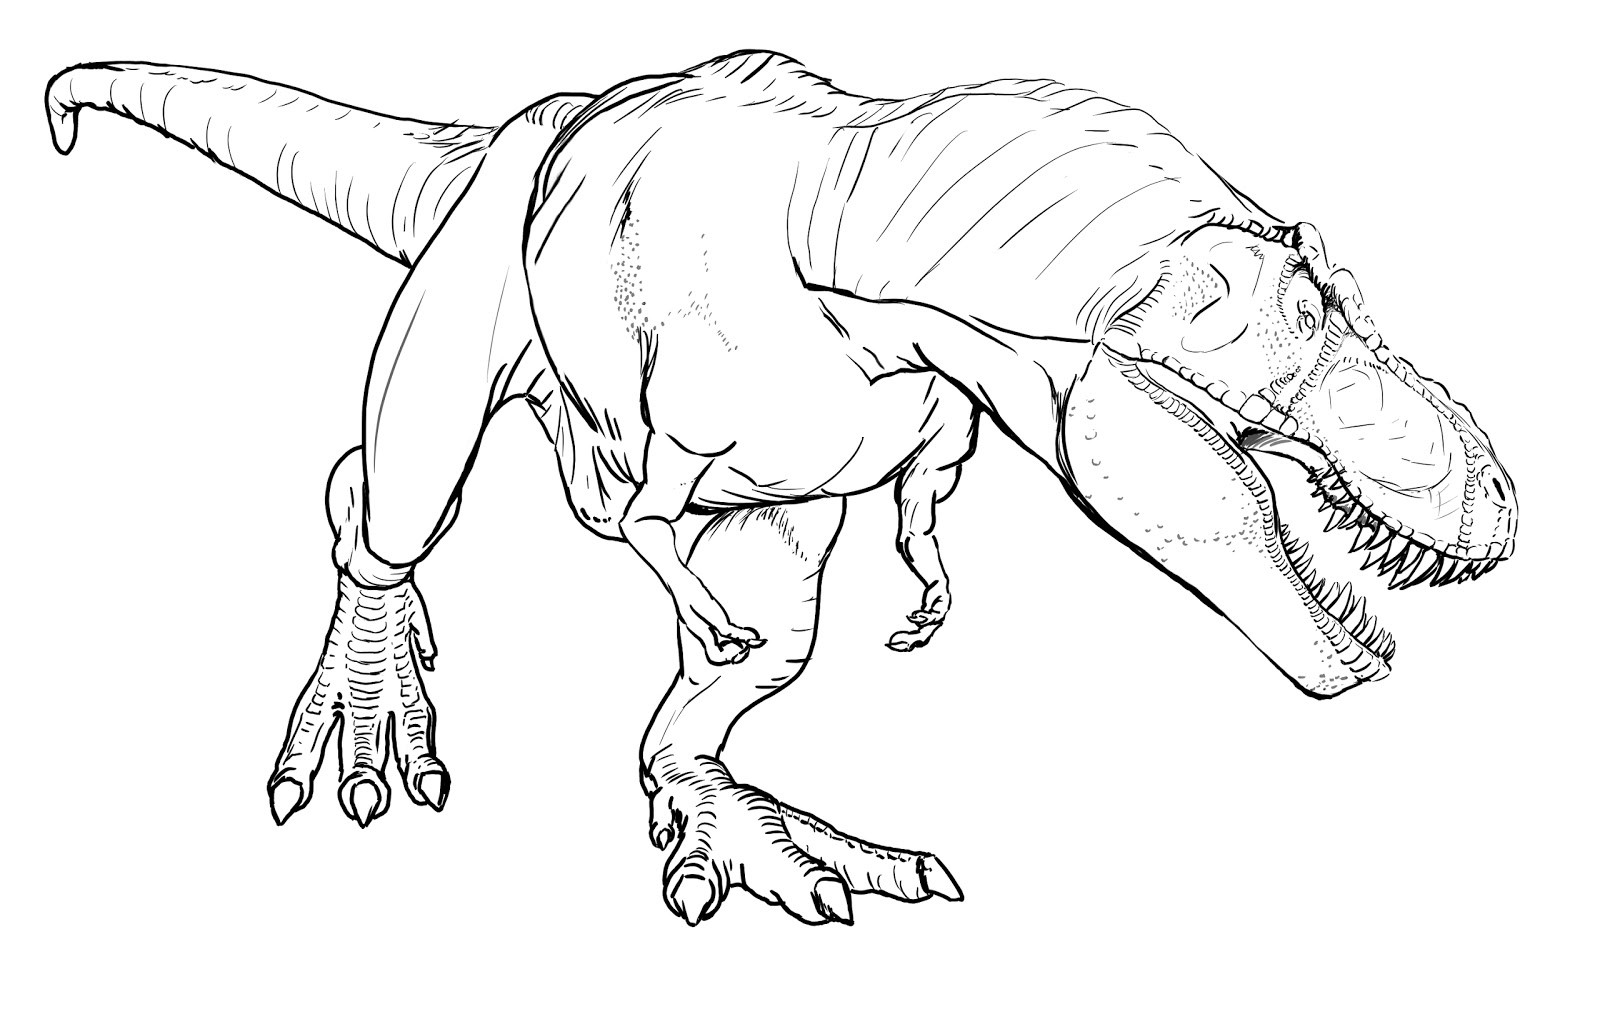 T Rex Printable Coloring Pages
 TRex Coloring Pages Best Coloring Pages For Kids